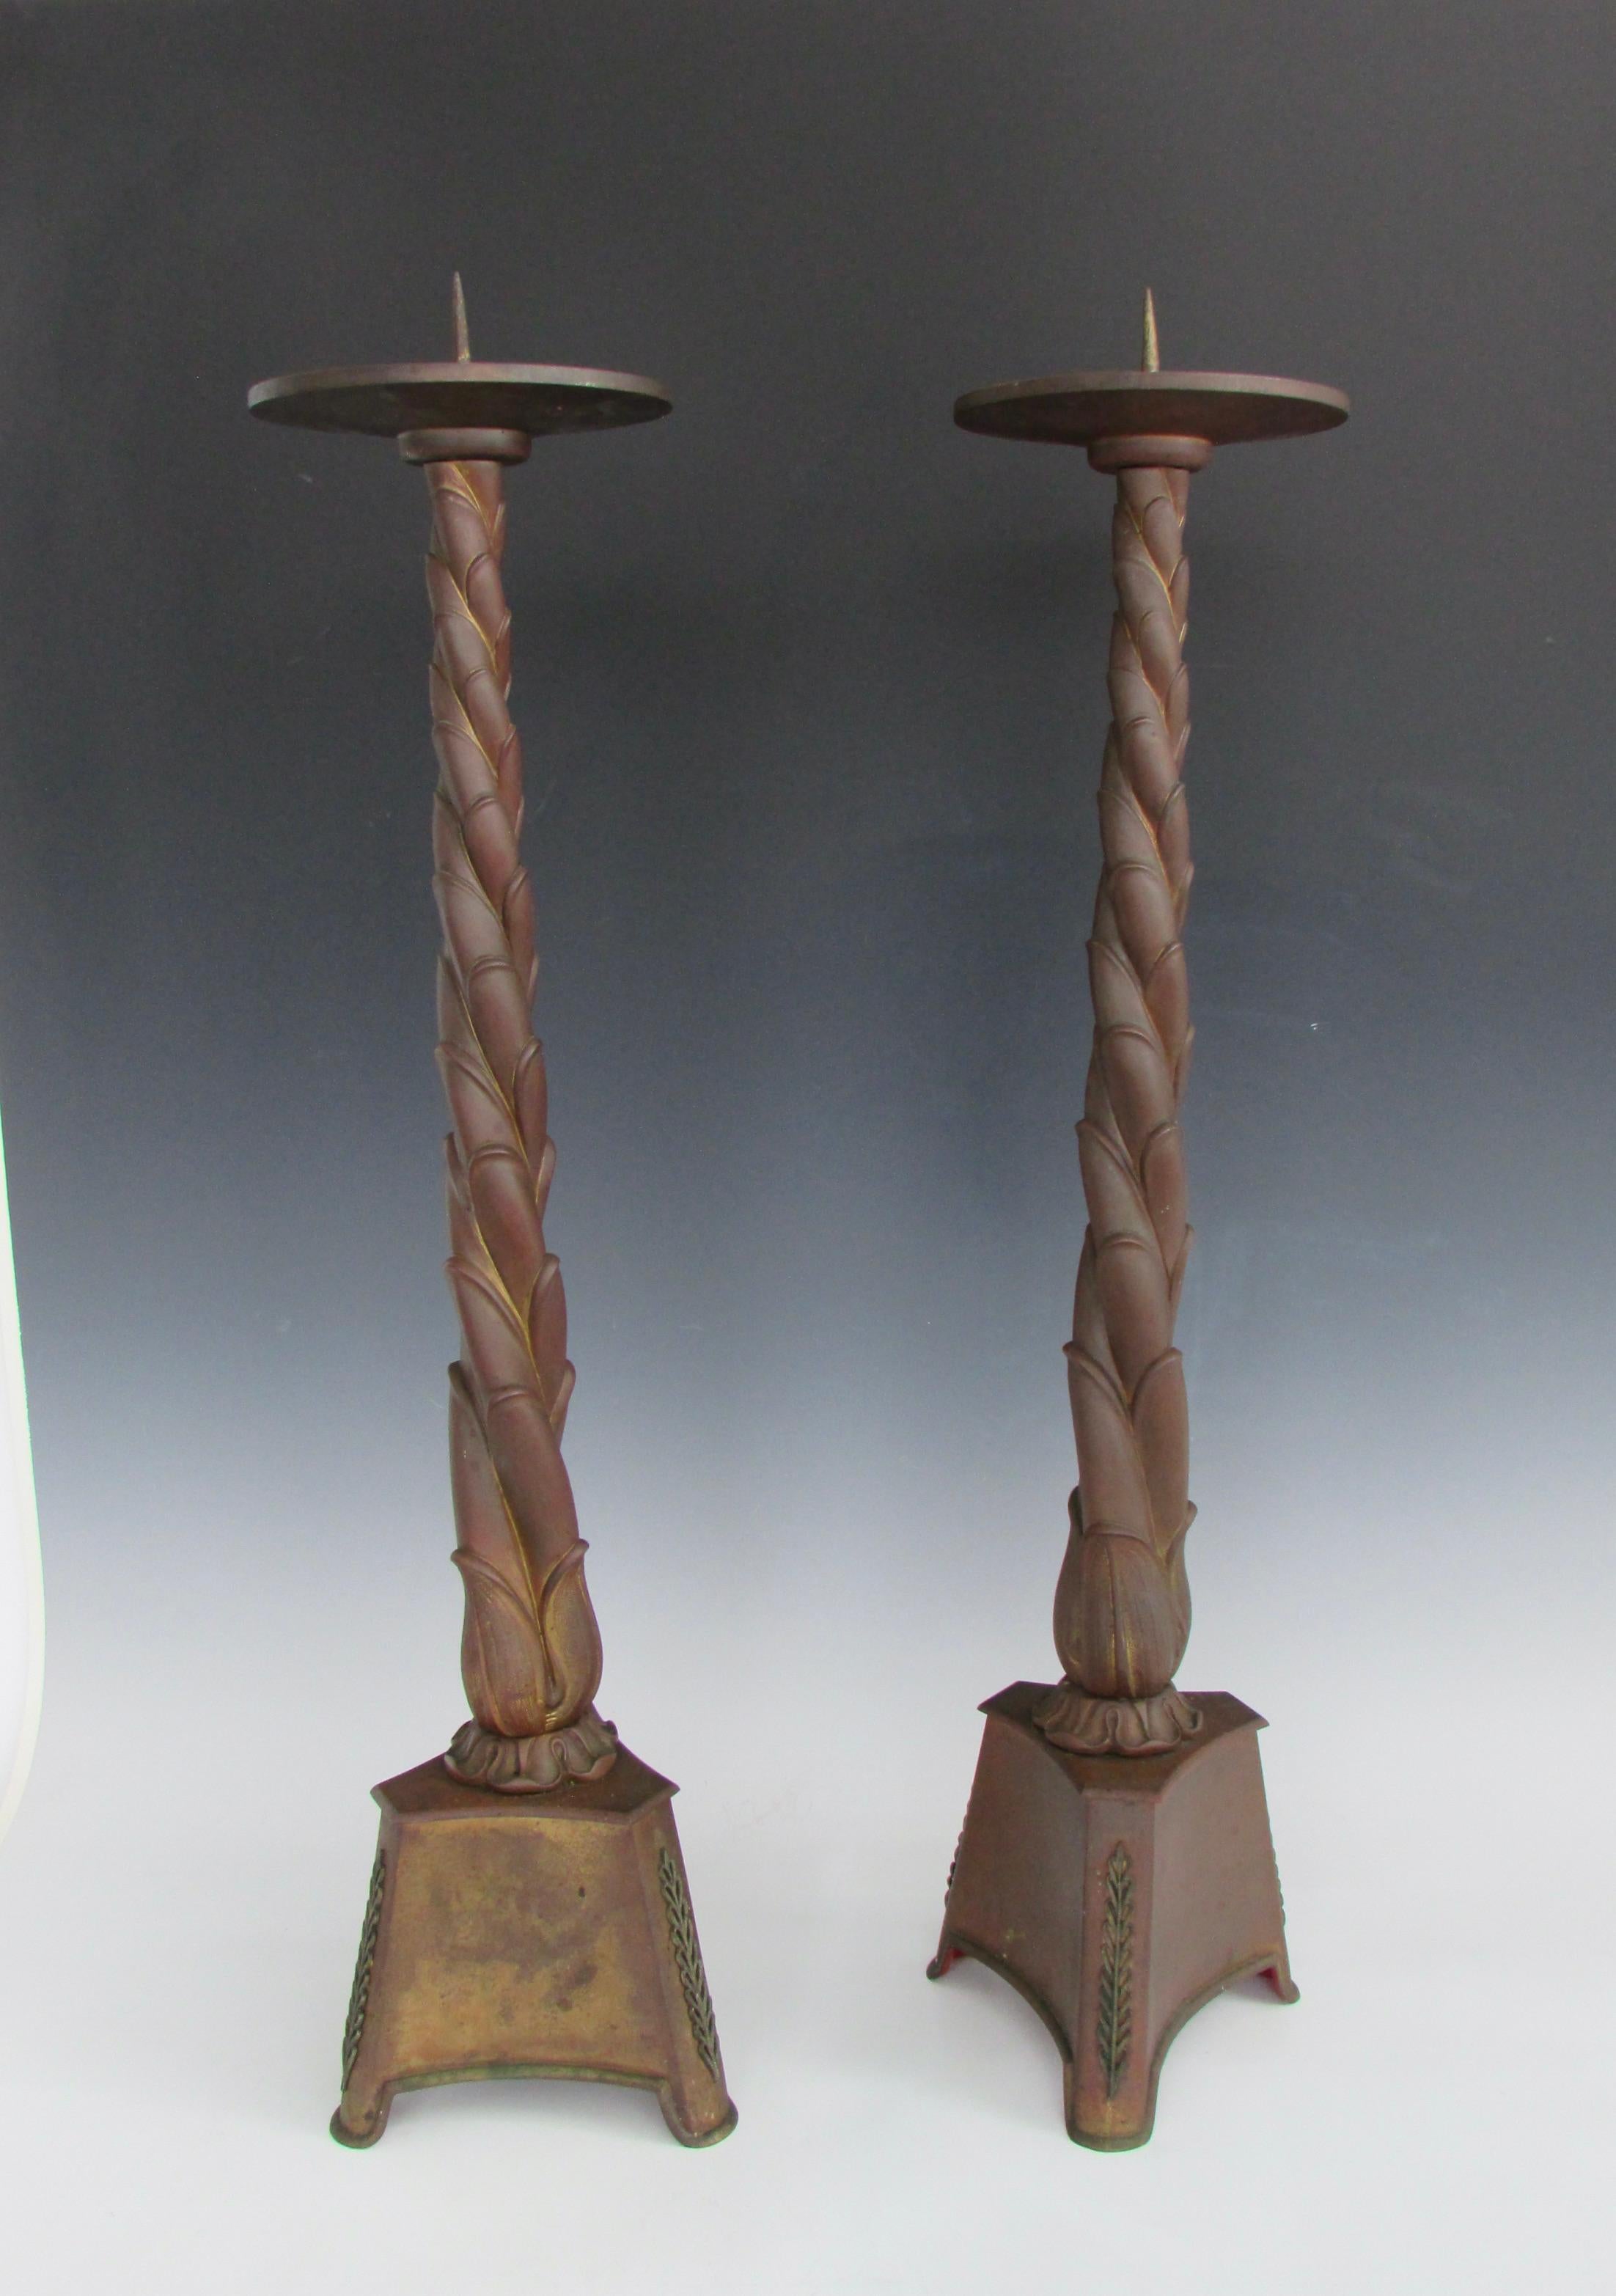 Large scale gothic bronze candle sticks. Twist column on triangle base holds large sconce dish top. 30.75